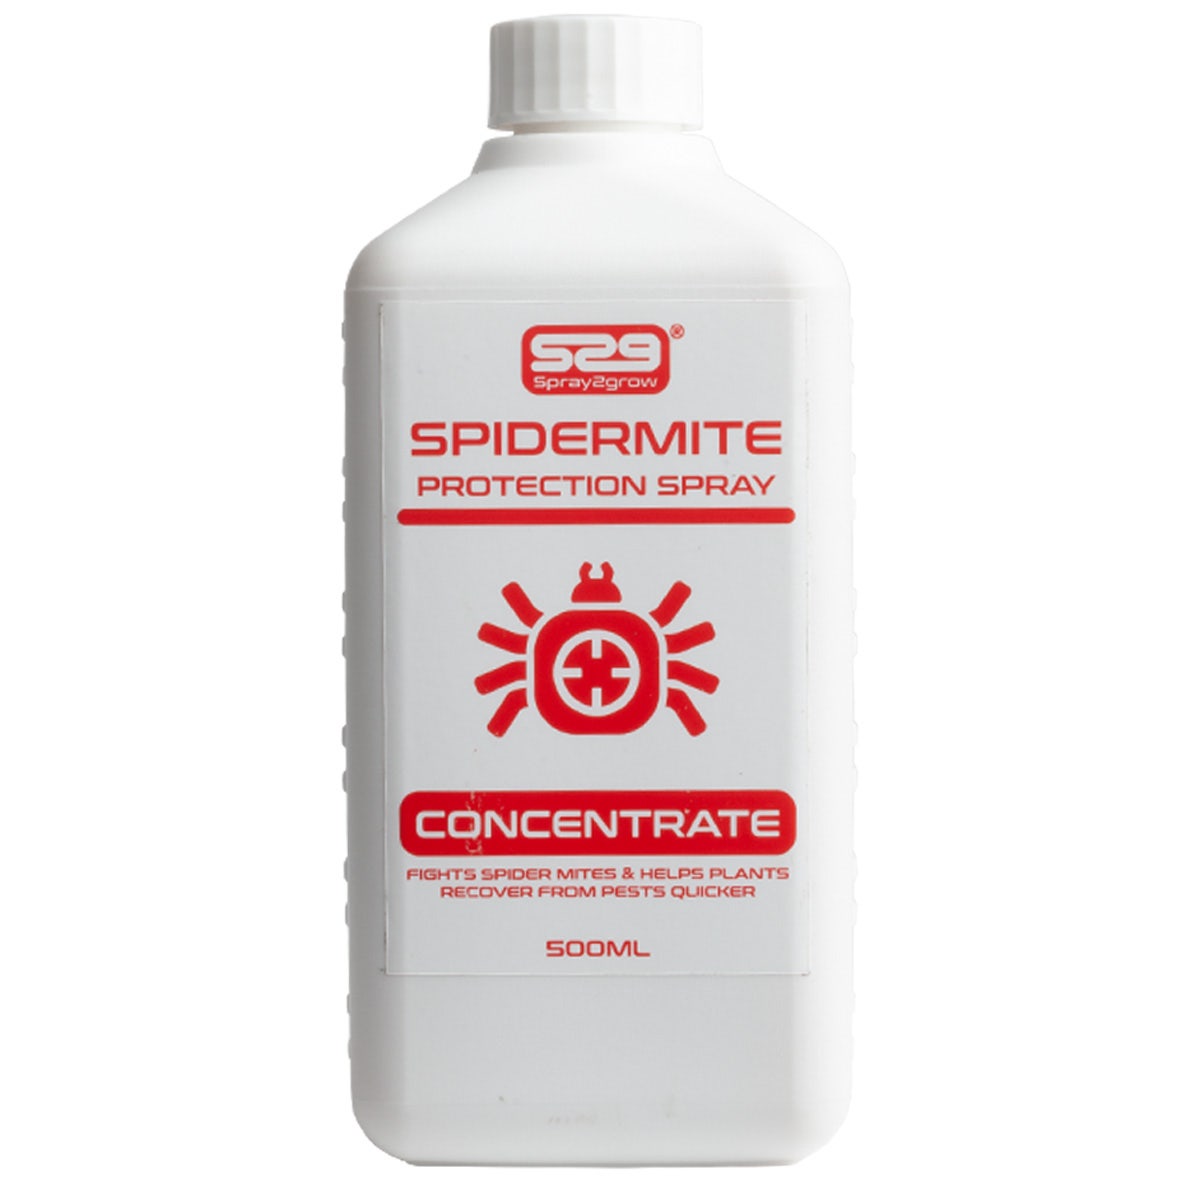 Spray2Grow - Spider Mite Protection Spray Concentrate